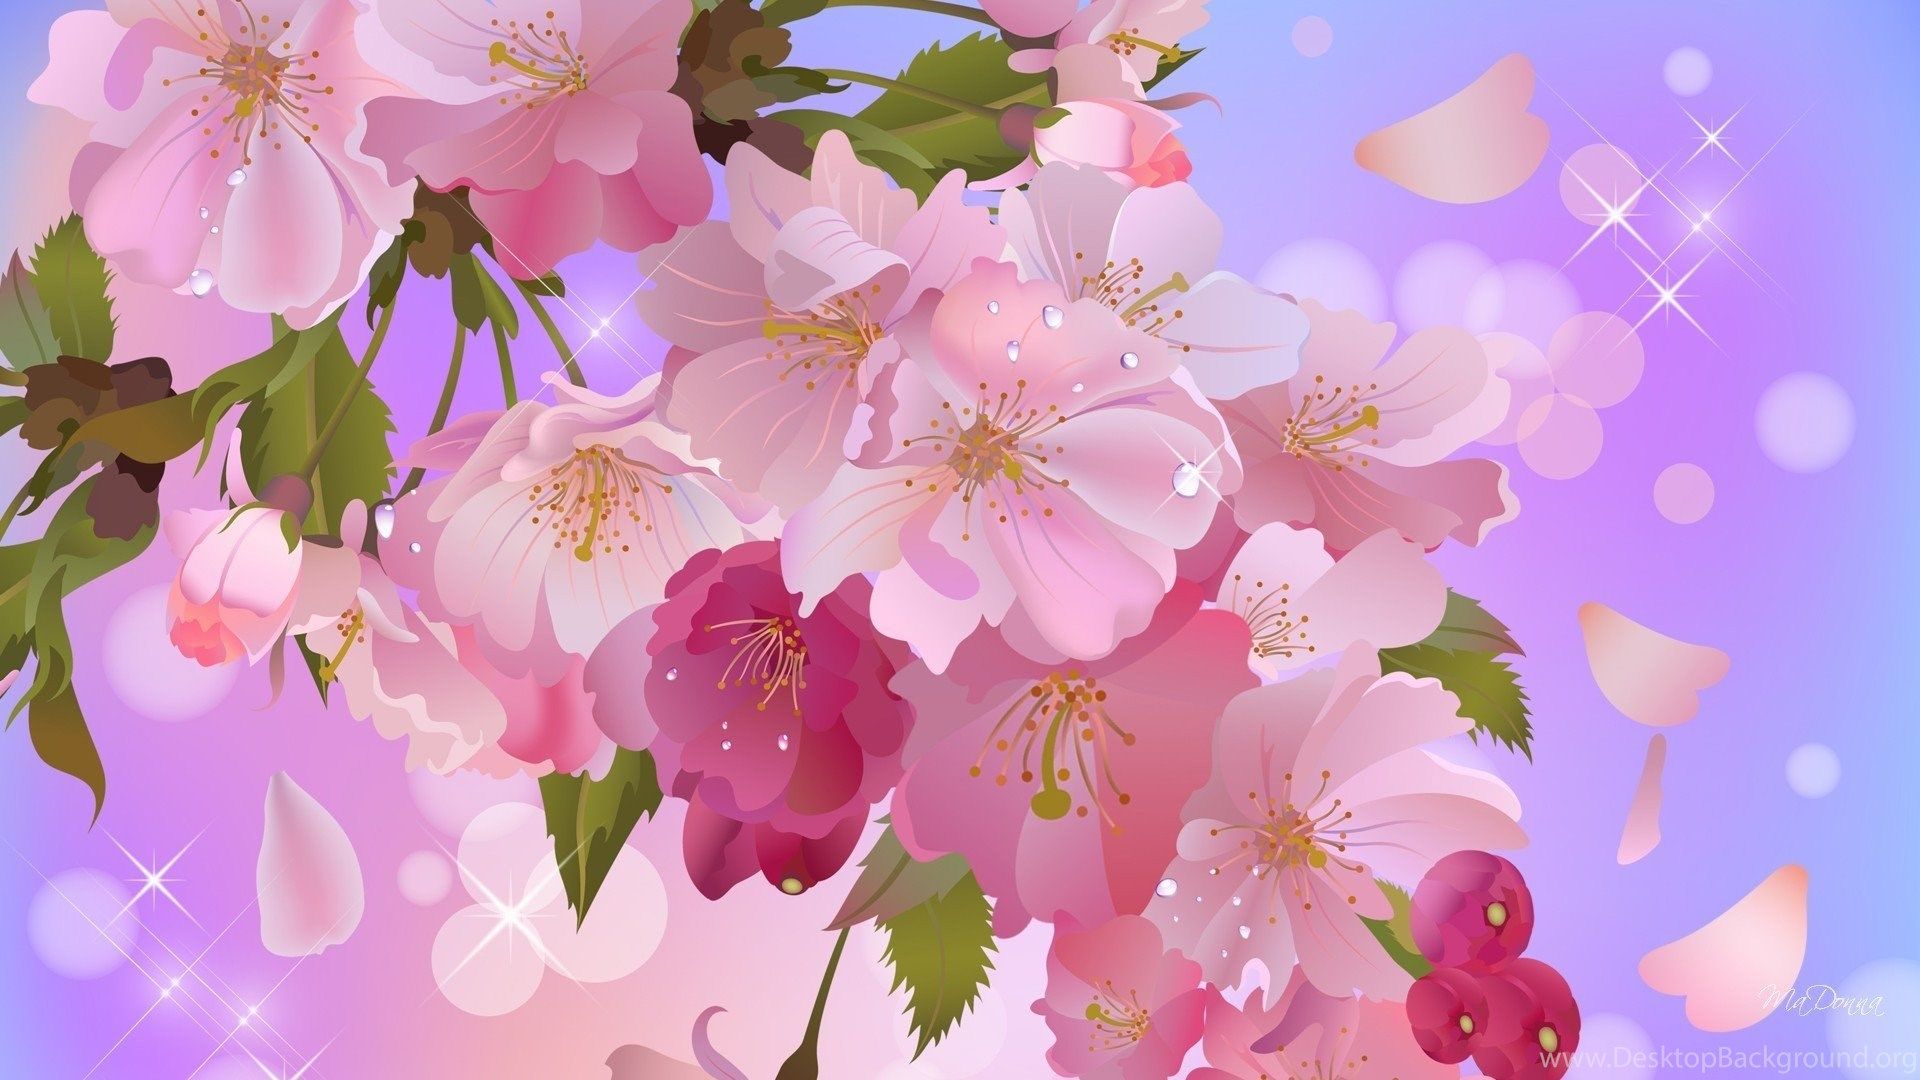 cute» 1080P, 2k, 4k Full HD Wallpapers, Backgrounds Free Download |  Wallpaper Crafter » Page 2